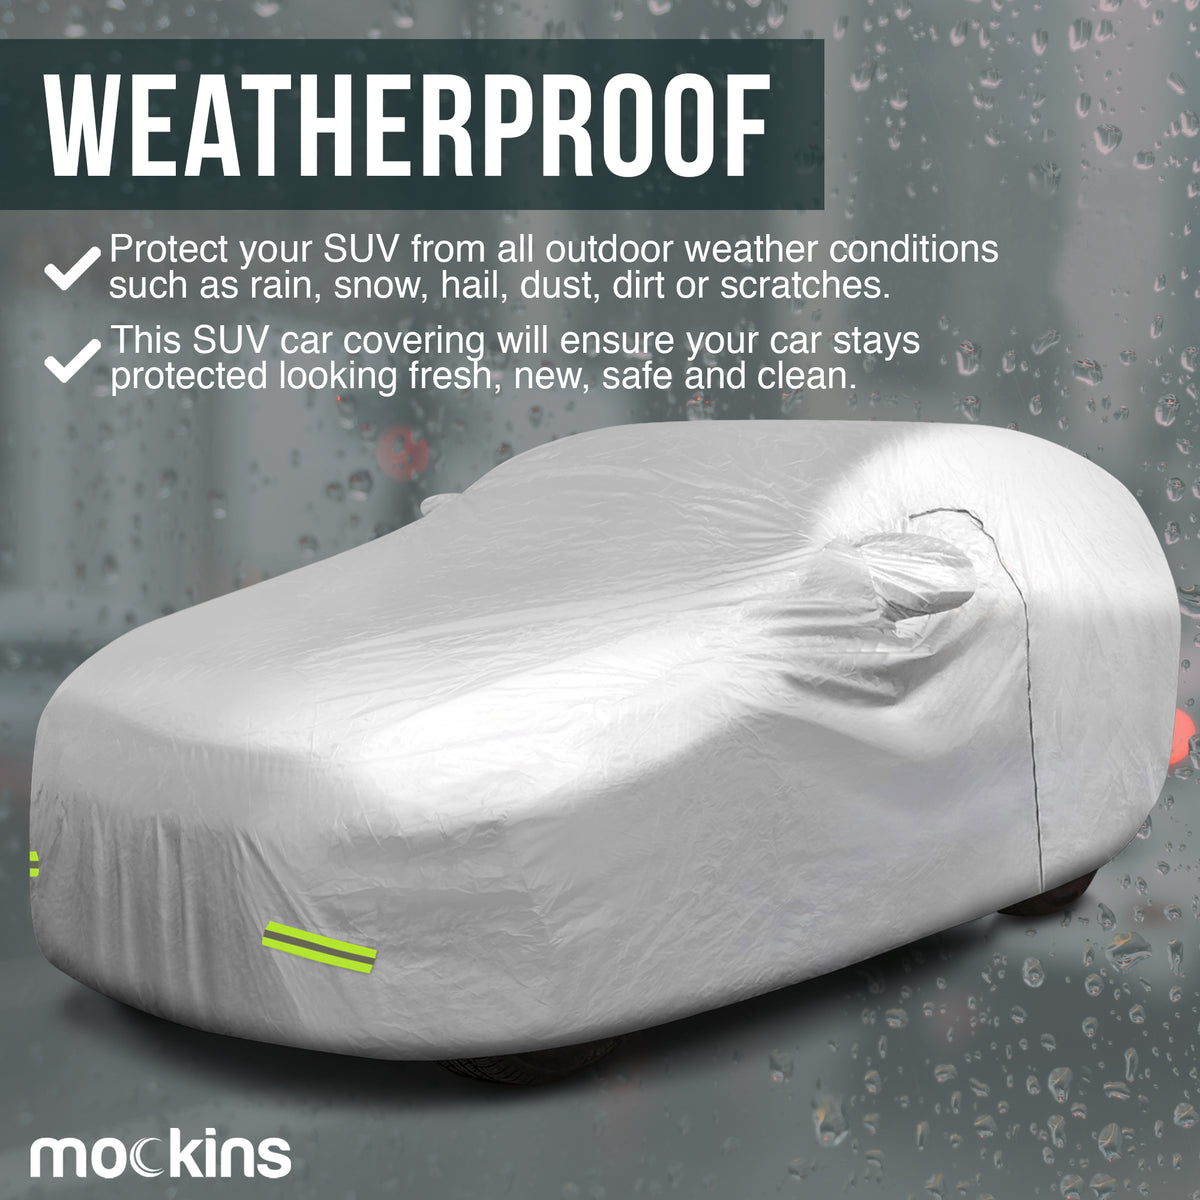 Mockins Waterproof Car &amp; SUV Covers Are Weatherproof Which Protects Your Car From All Outdoor Weather Conditions Such As Rain ,Snow ,Hail ,Dust Dirt Or Scratches